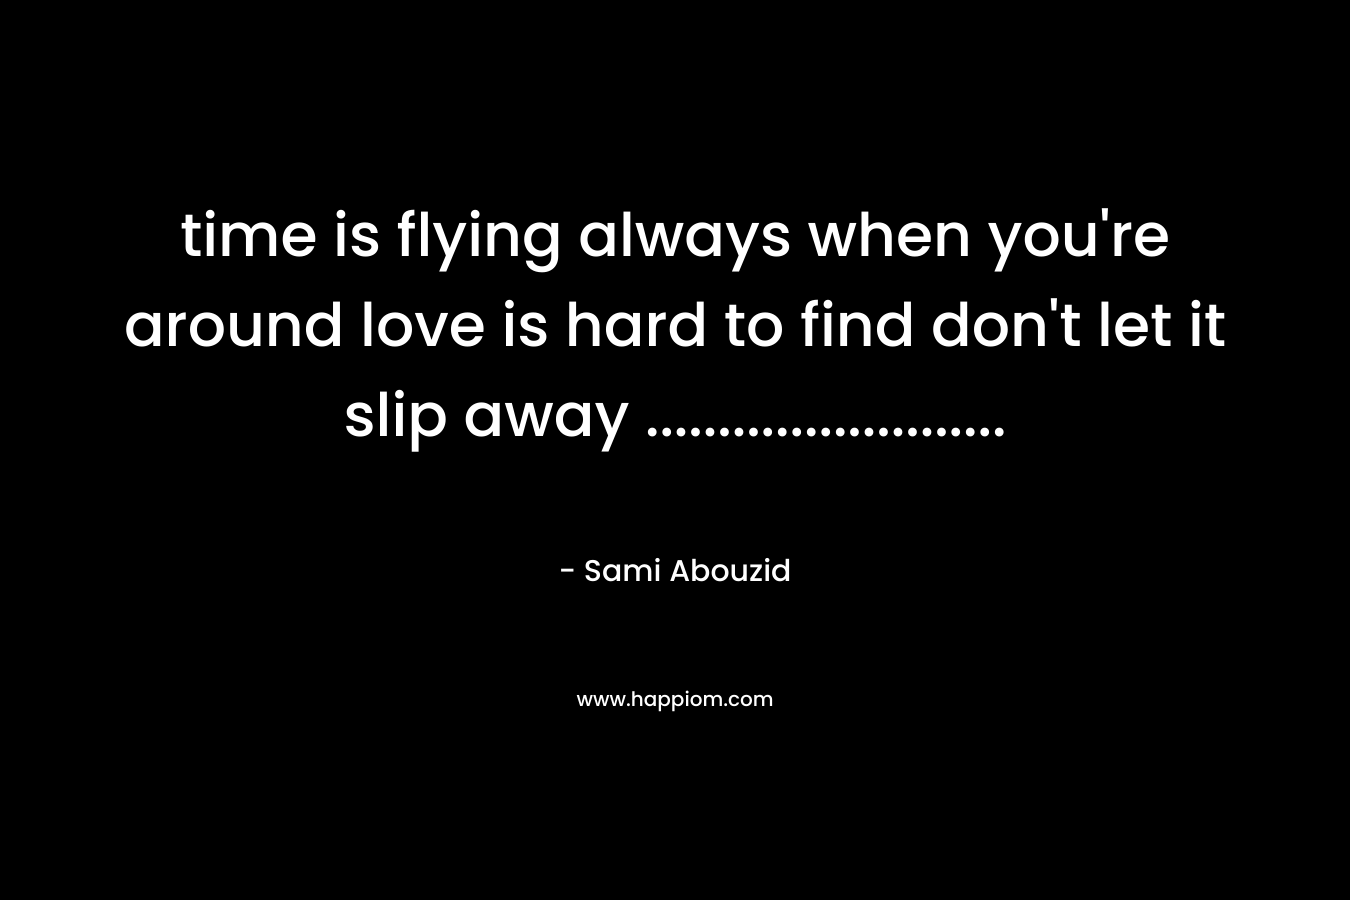 time is flying always when you're around love is hard to find don't let it slip away .........................